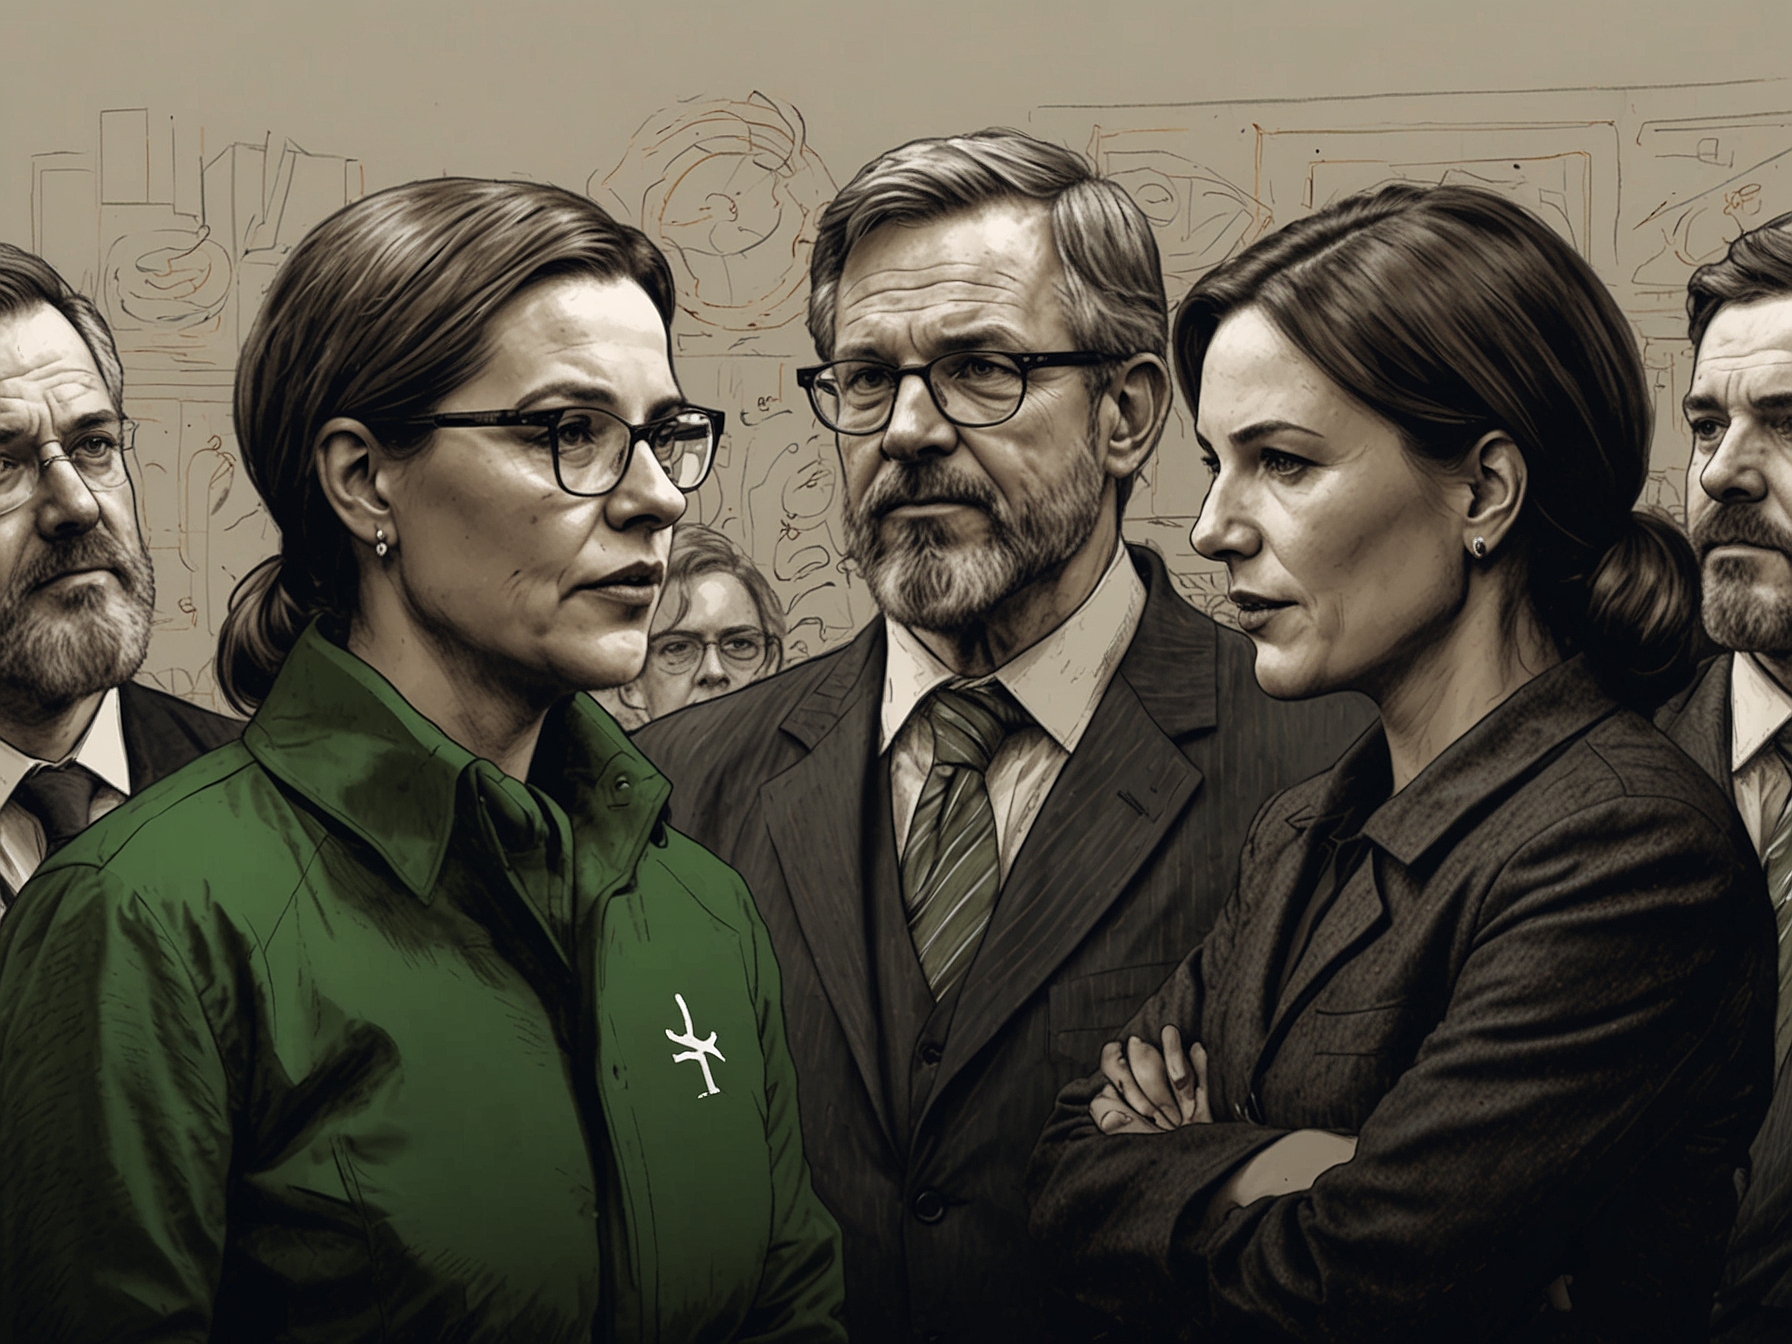 Illustration of Sinn Féin leaders discussing coalition strategies, emphasizing unity and collaboration within the left-wing movement to challenge the status quo.